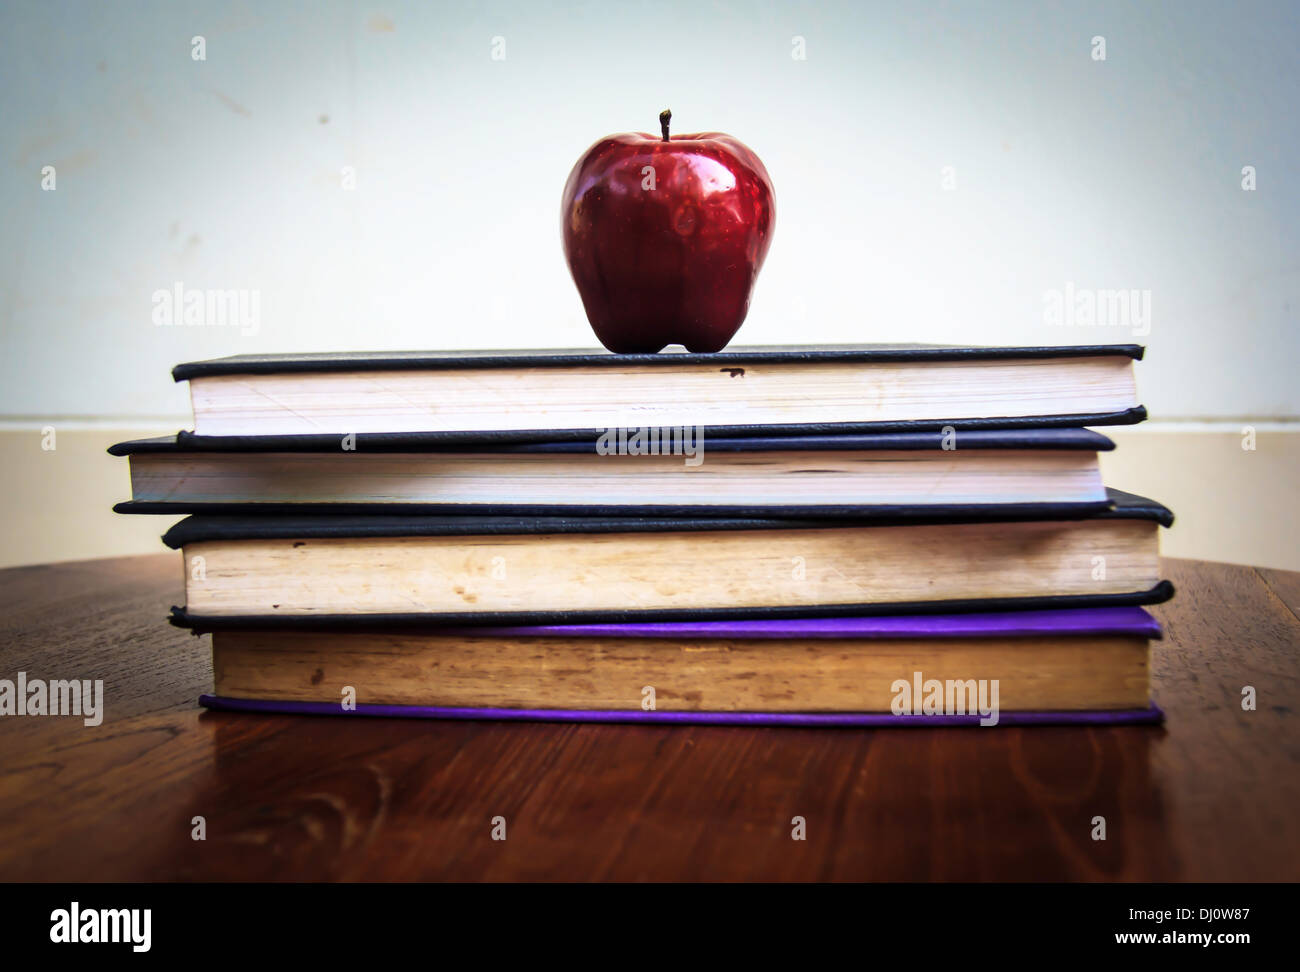 withered red apple and old books on wooden tabletop. Stock Photo